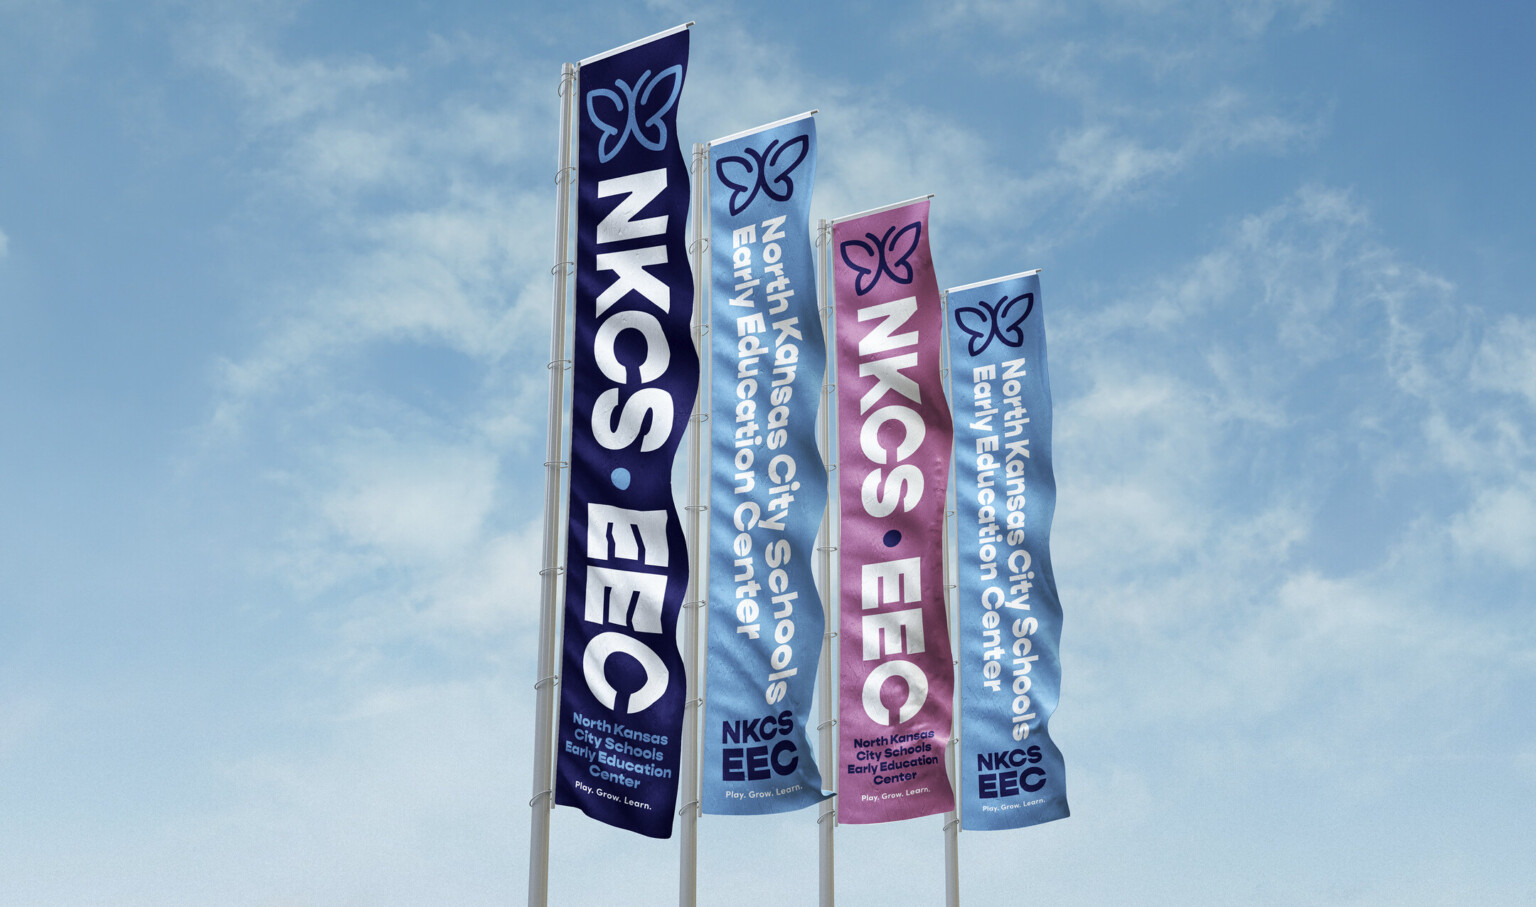 blue and purple vertical banners with white lettering against a blue sky